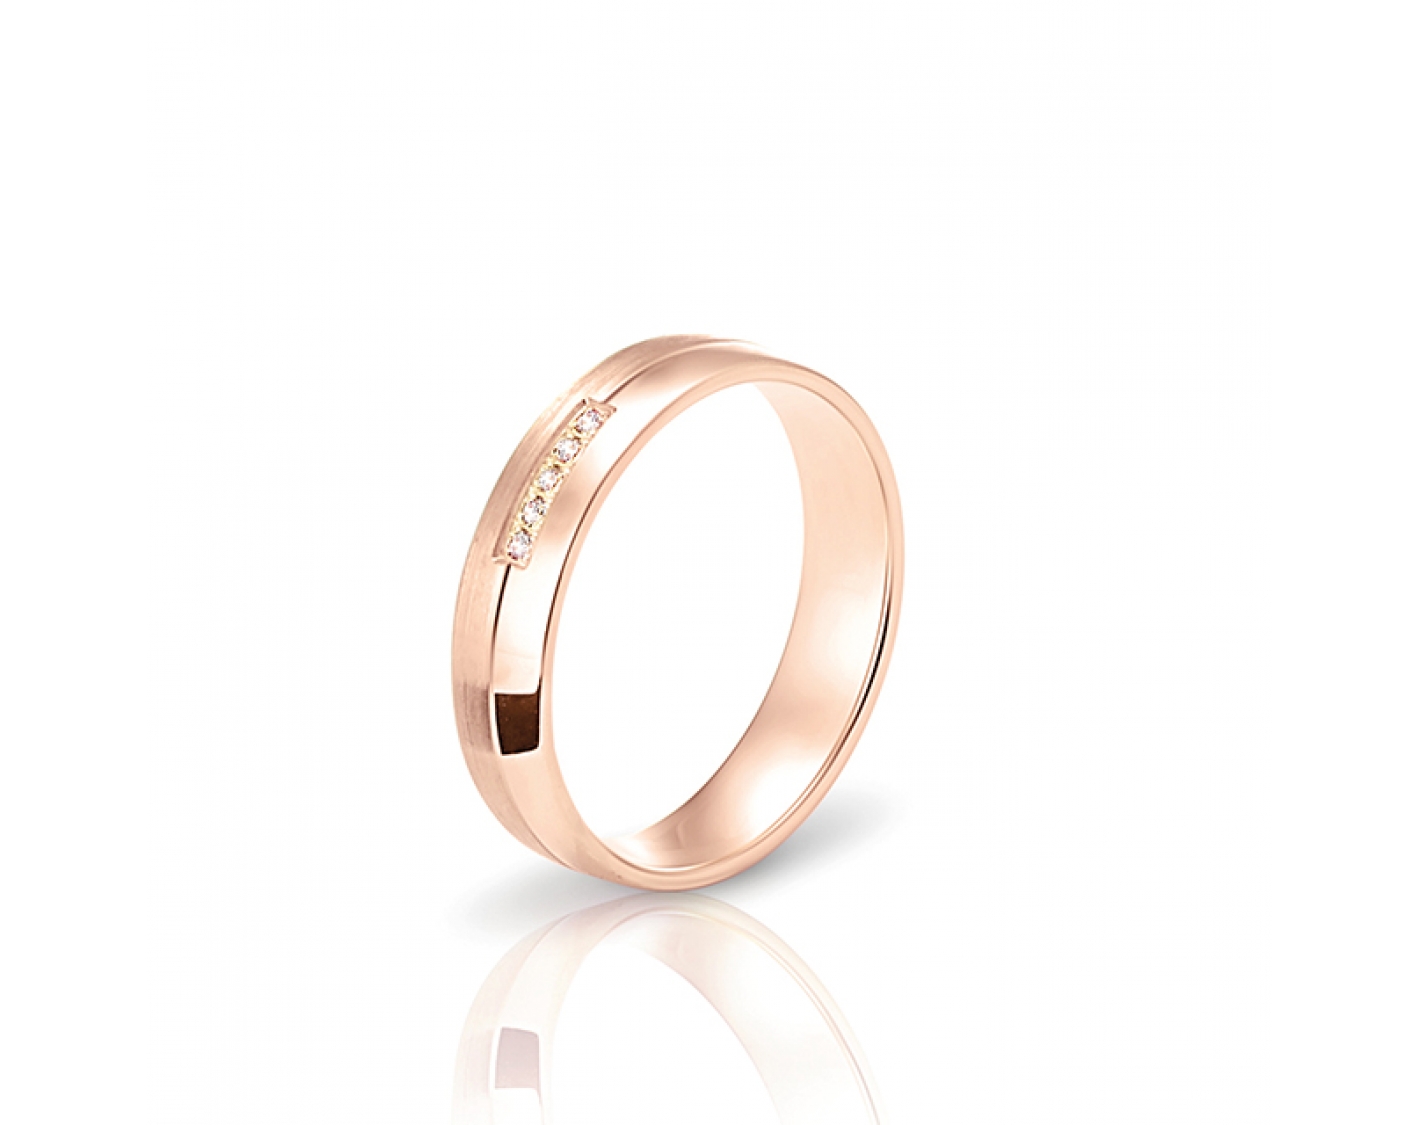 18k rose gold 4,5mm wedding band with diamonds Photos & images